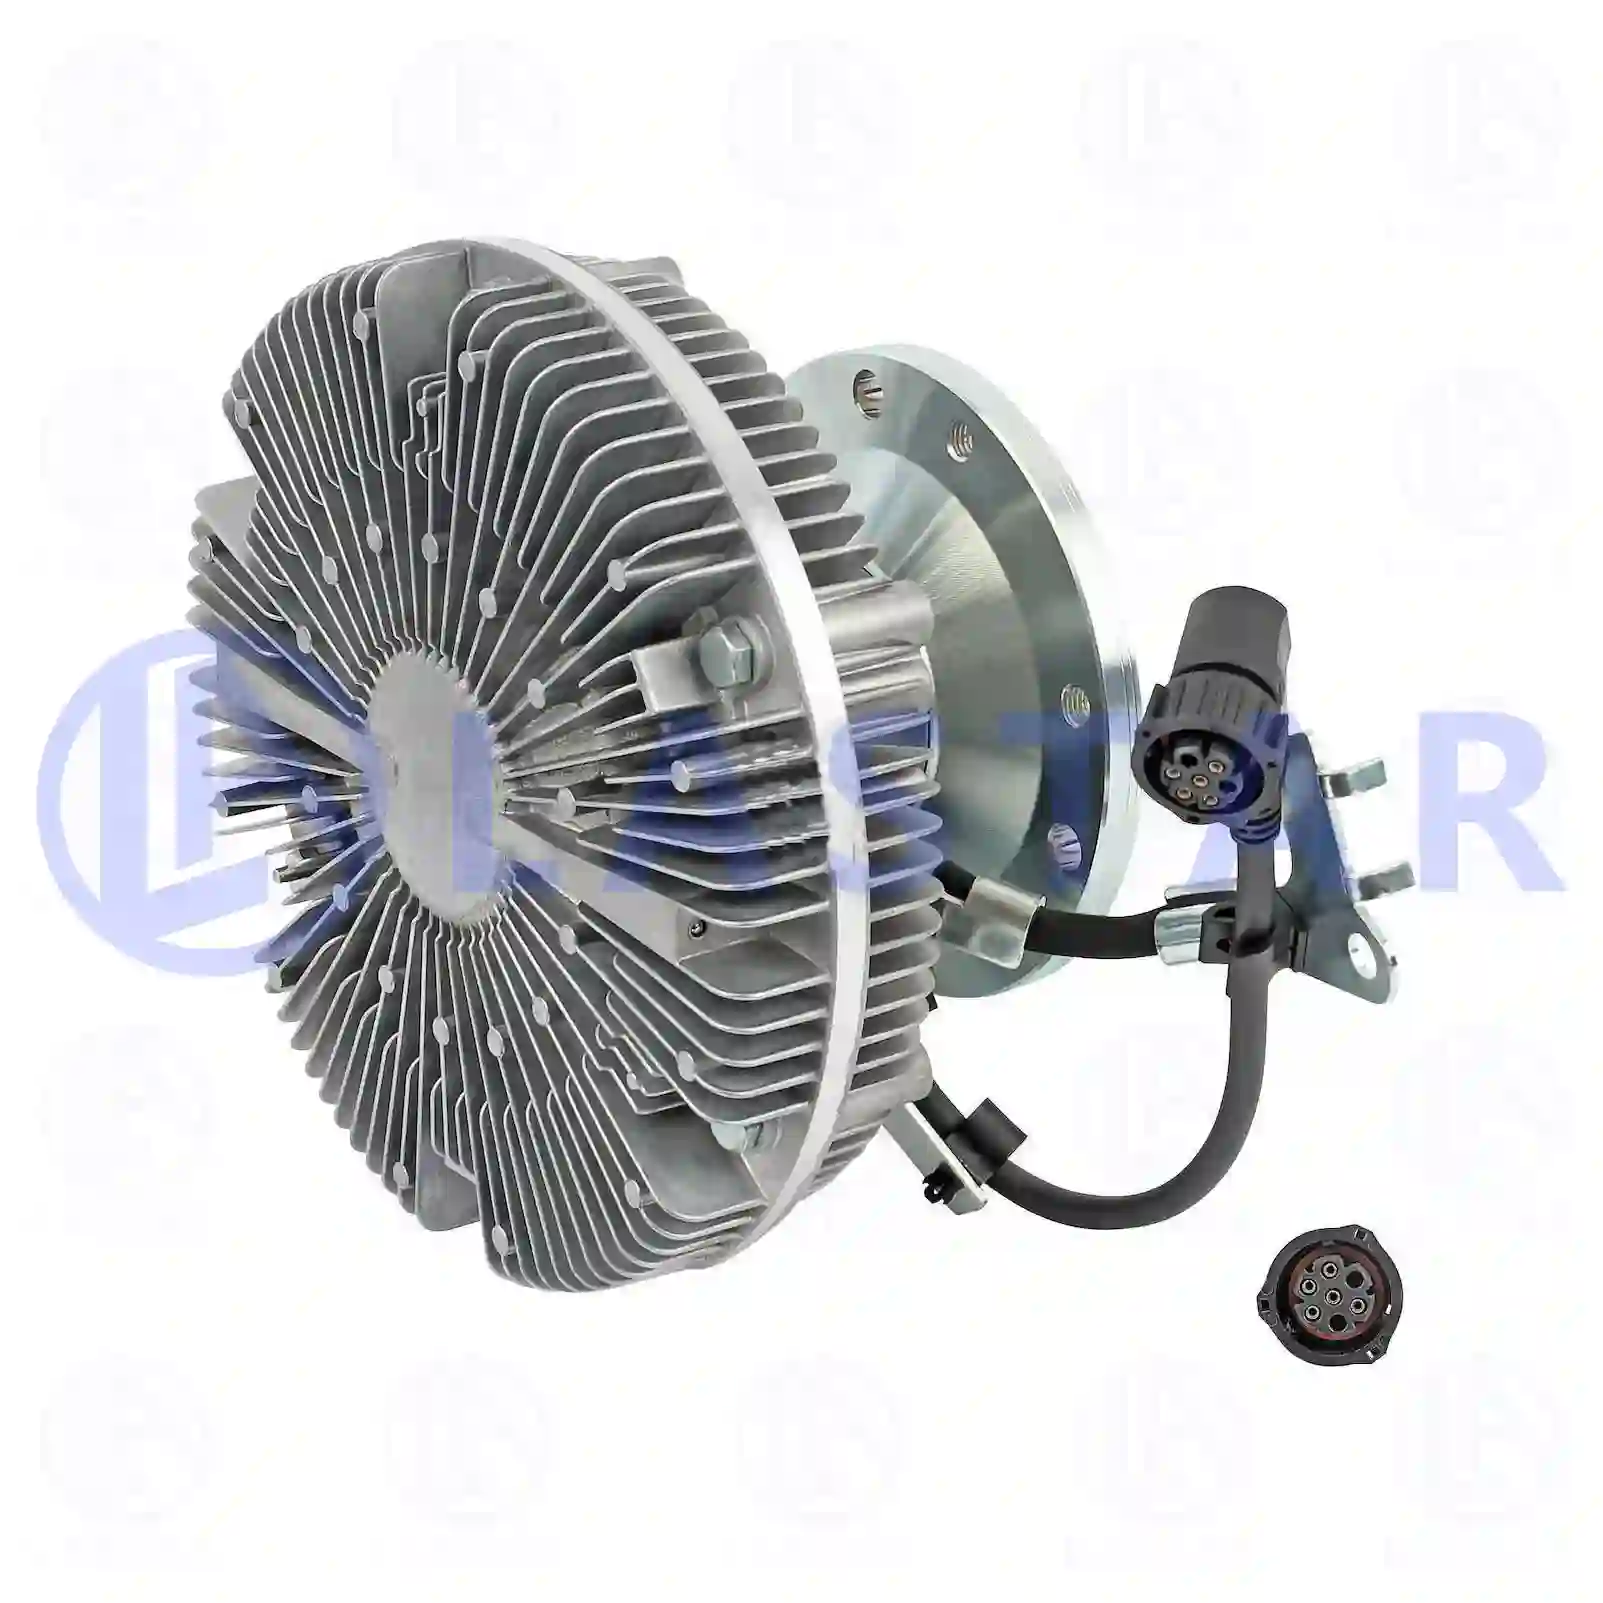 Fan clutch, 77707975, 0002008622, 5412001122, 5412001522, 5412001822 ||  77707975 Lastar Spare Part | Truck Spare Parts, Auotomotive Spare Parts Fan clutch, 77707975, 0002008622, 5412001122, 5412001522, 5412001822 ||  77707975 Lastar Spare Part | Truck Spare Parts, Auotomotive Spare Parts